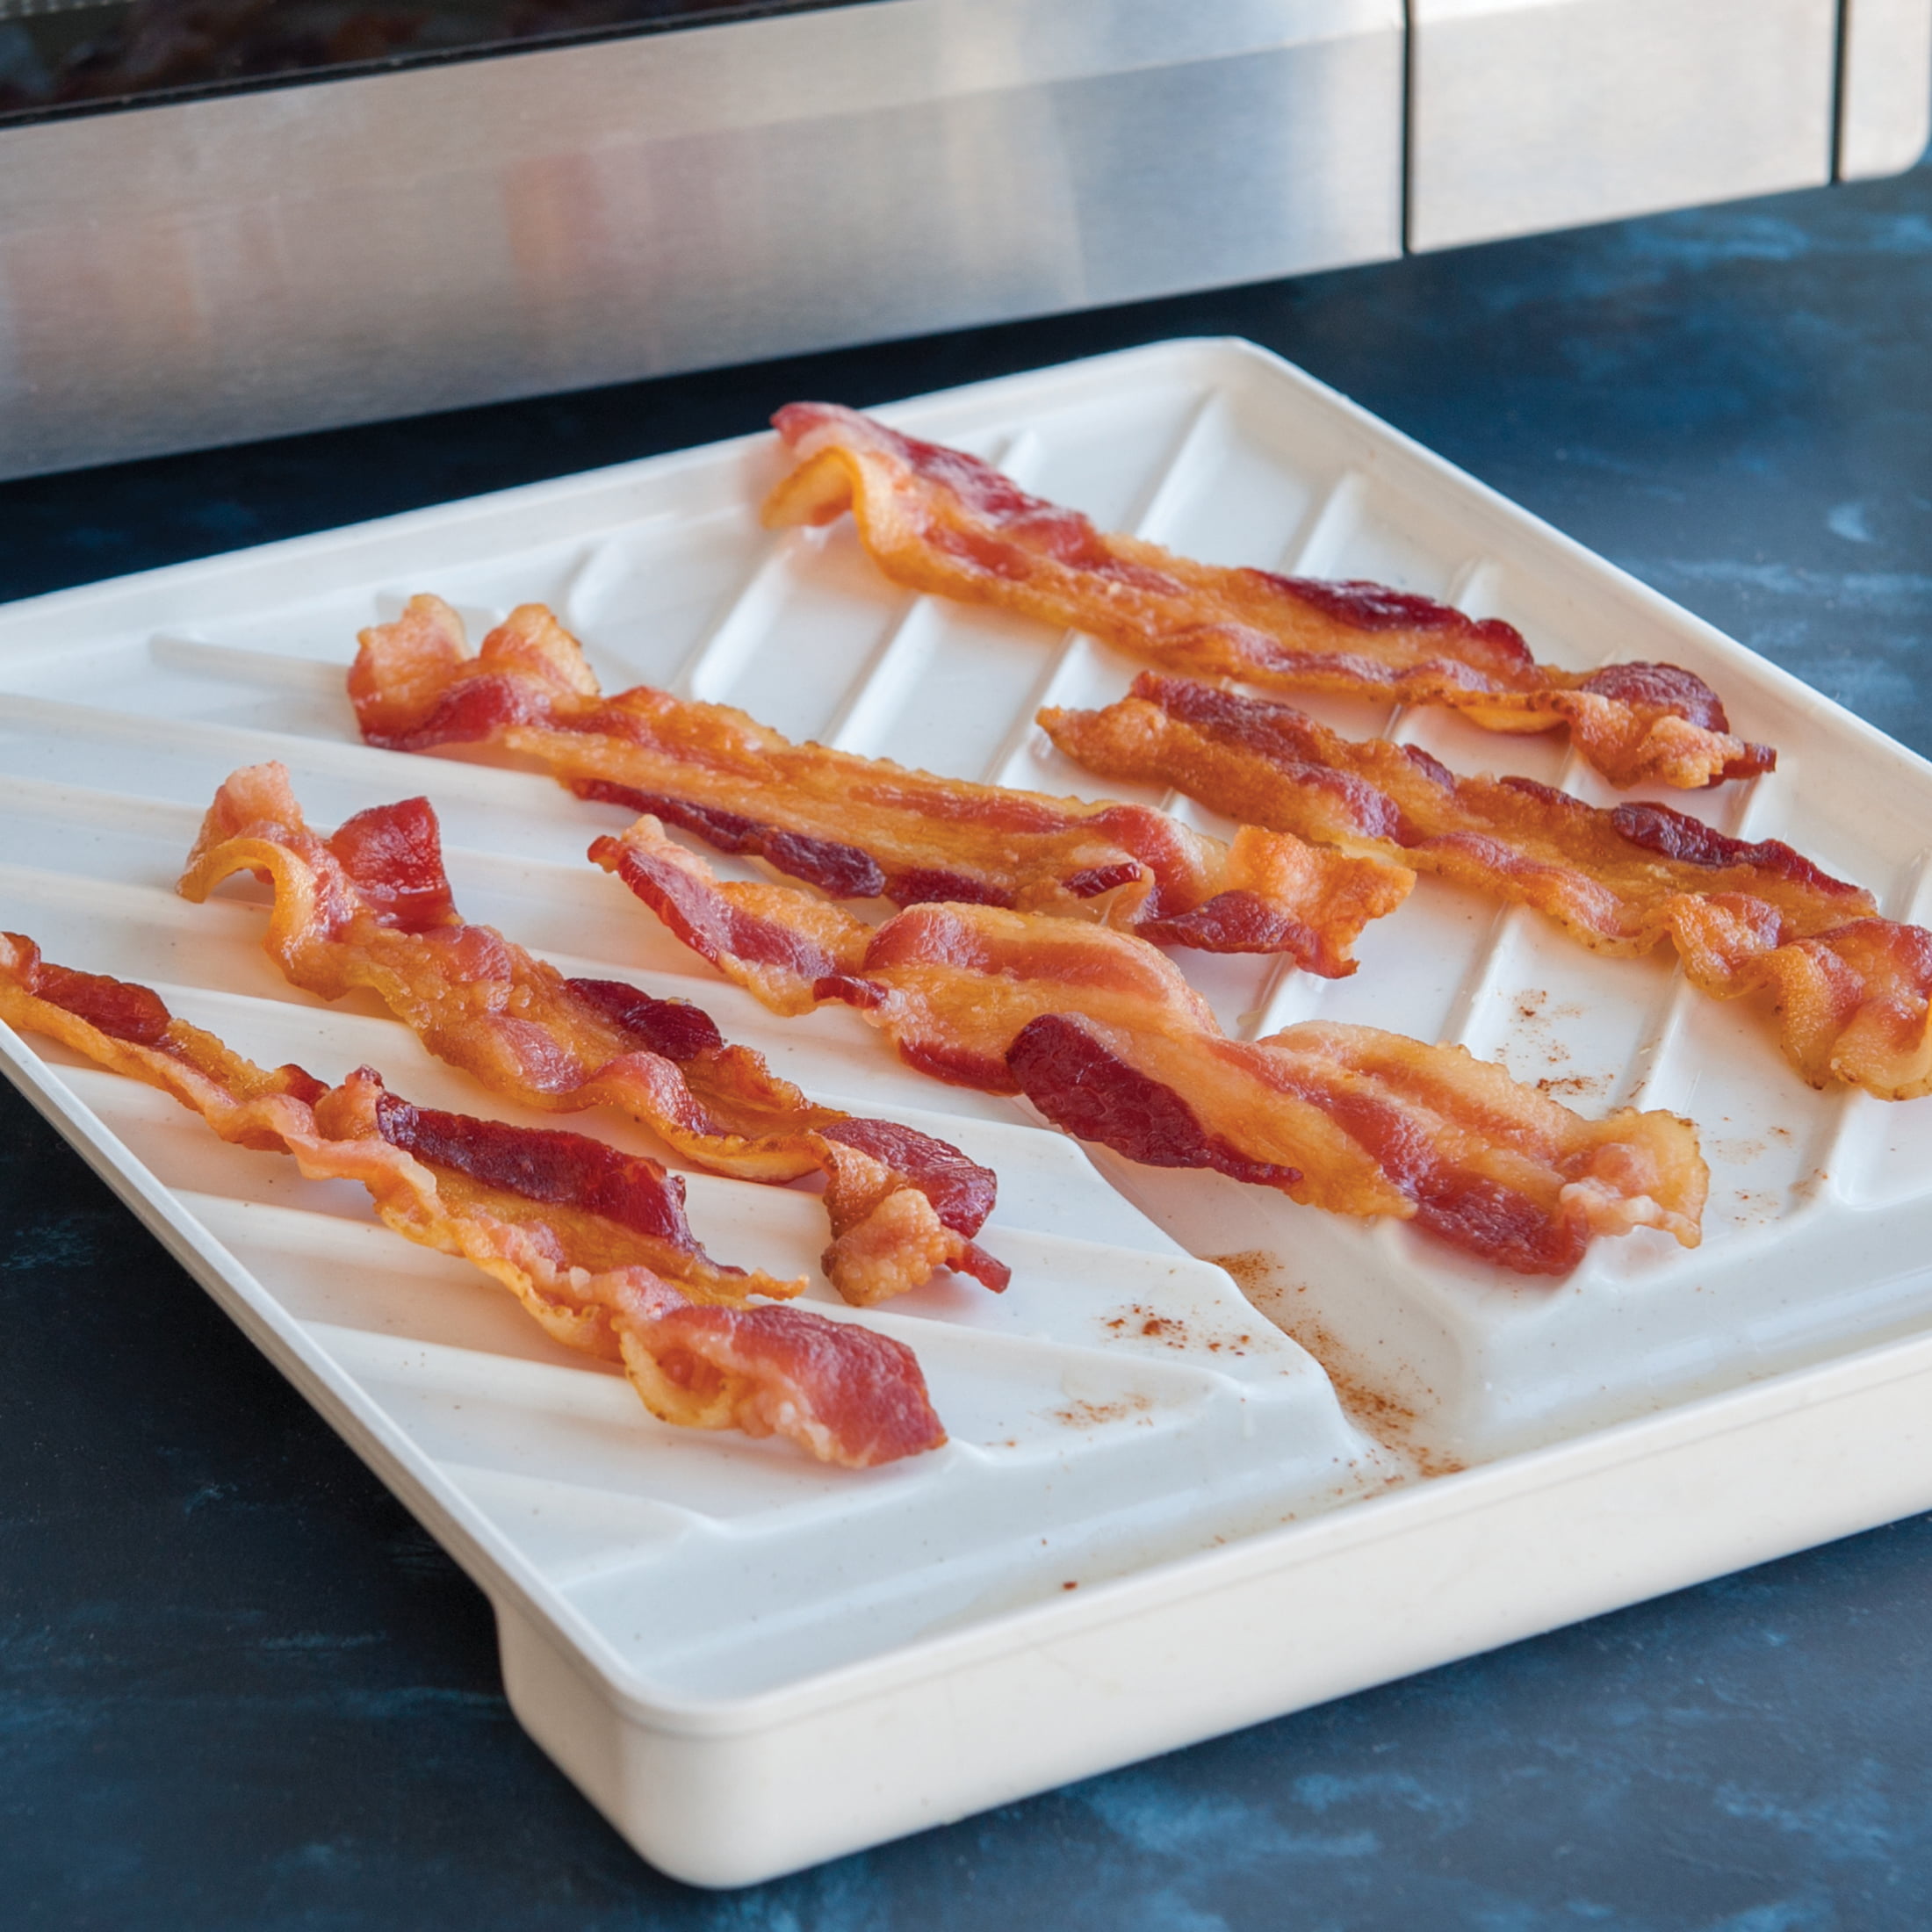 Nordic Ware Microwave Slanted Bacon Tray With Lid : Target